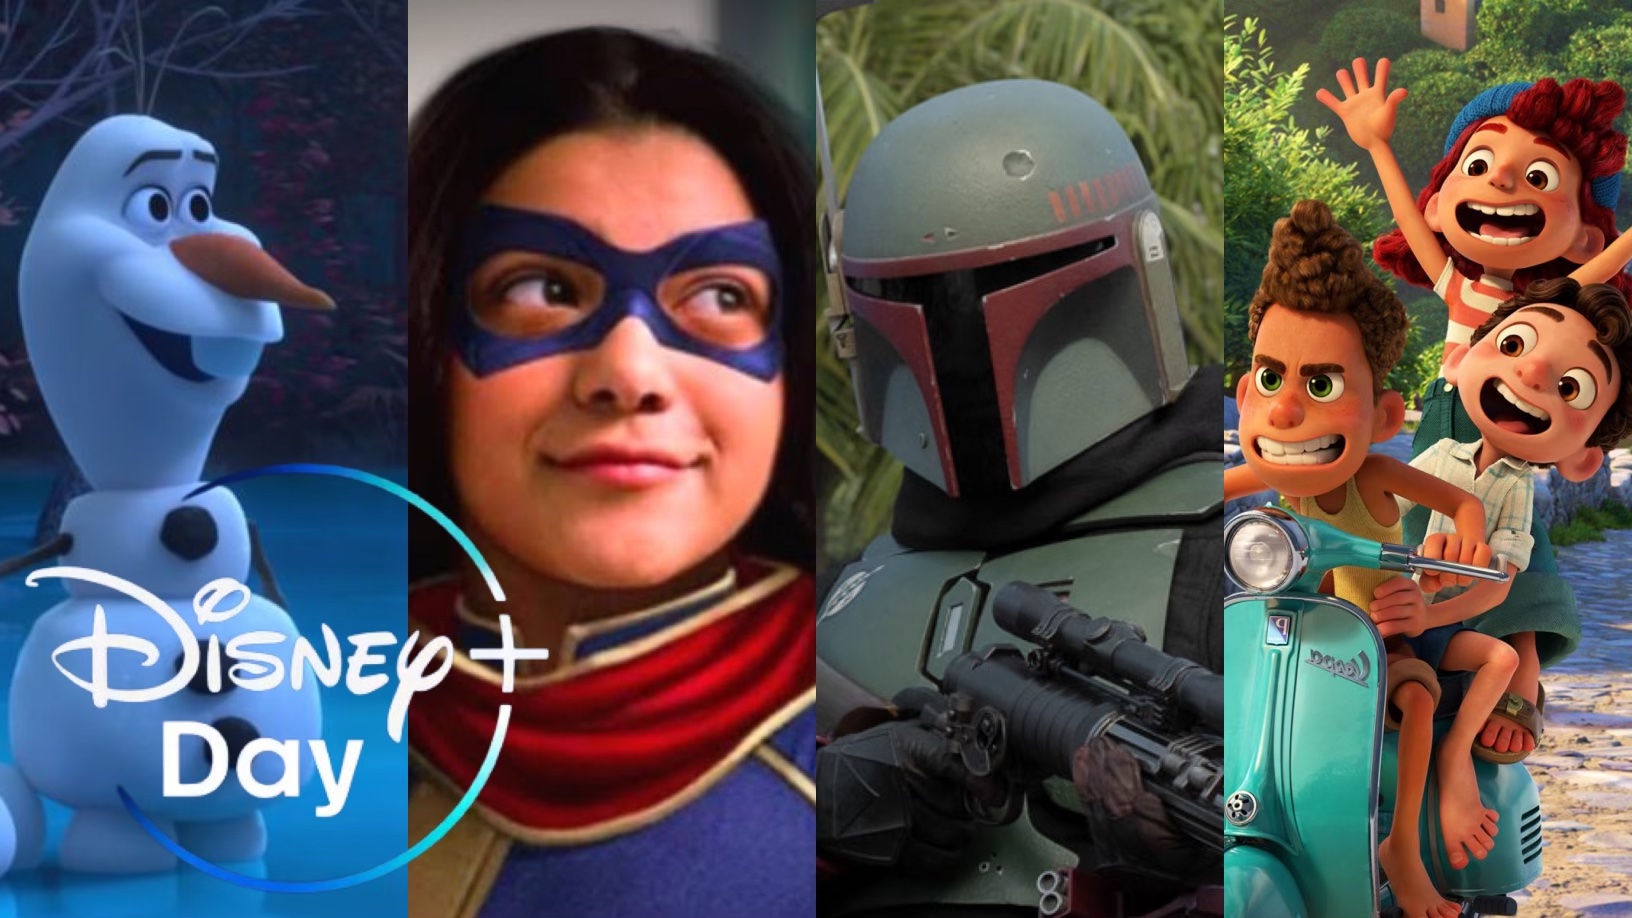 ‘Disney+ Day’ Details Emerge | New Disney, Pixar, Marvel, and Star Wars Projects & Specials